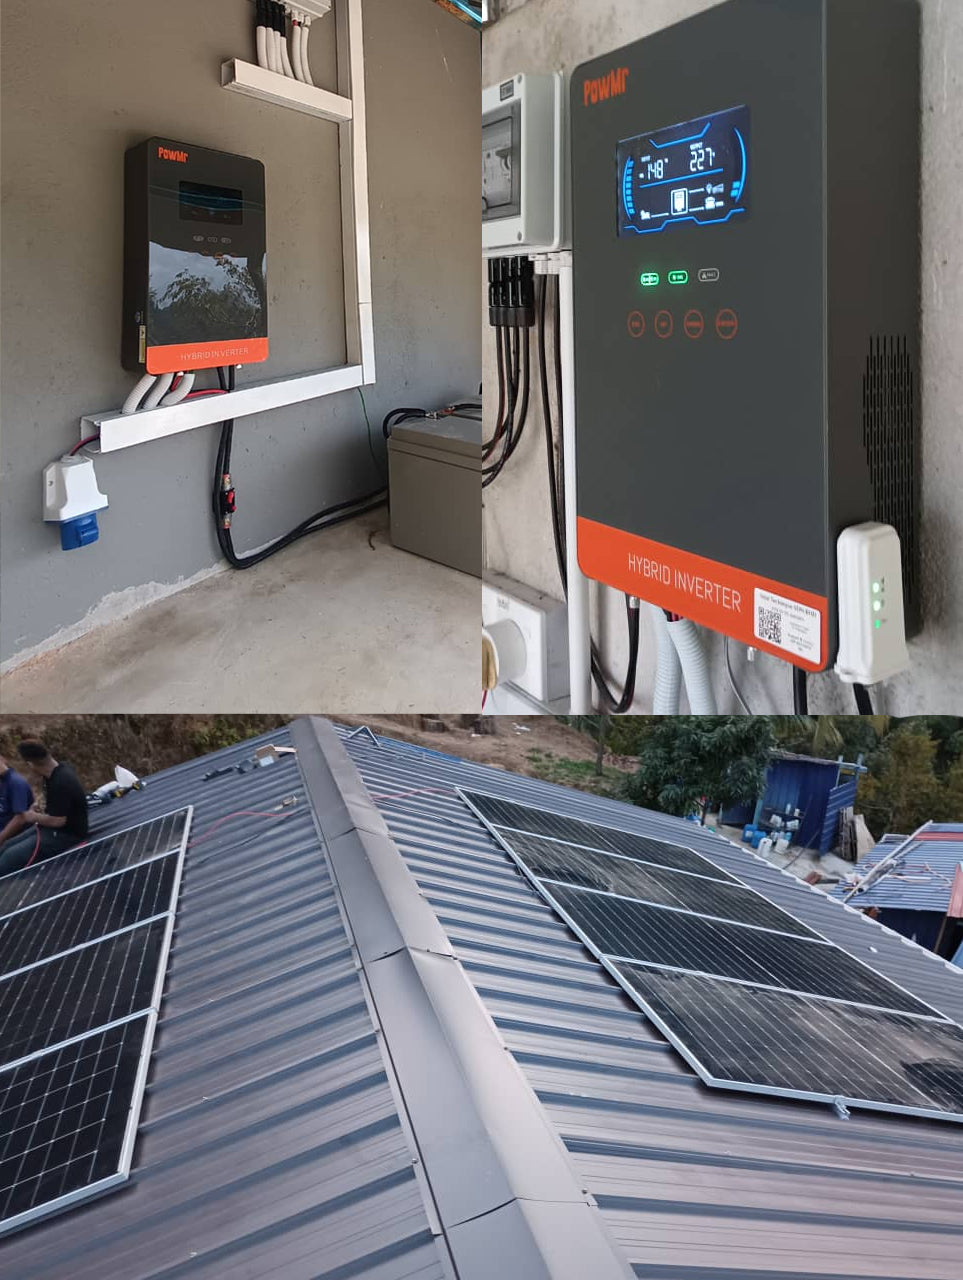 off grid solar system with 6500w energy output